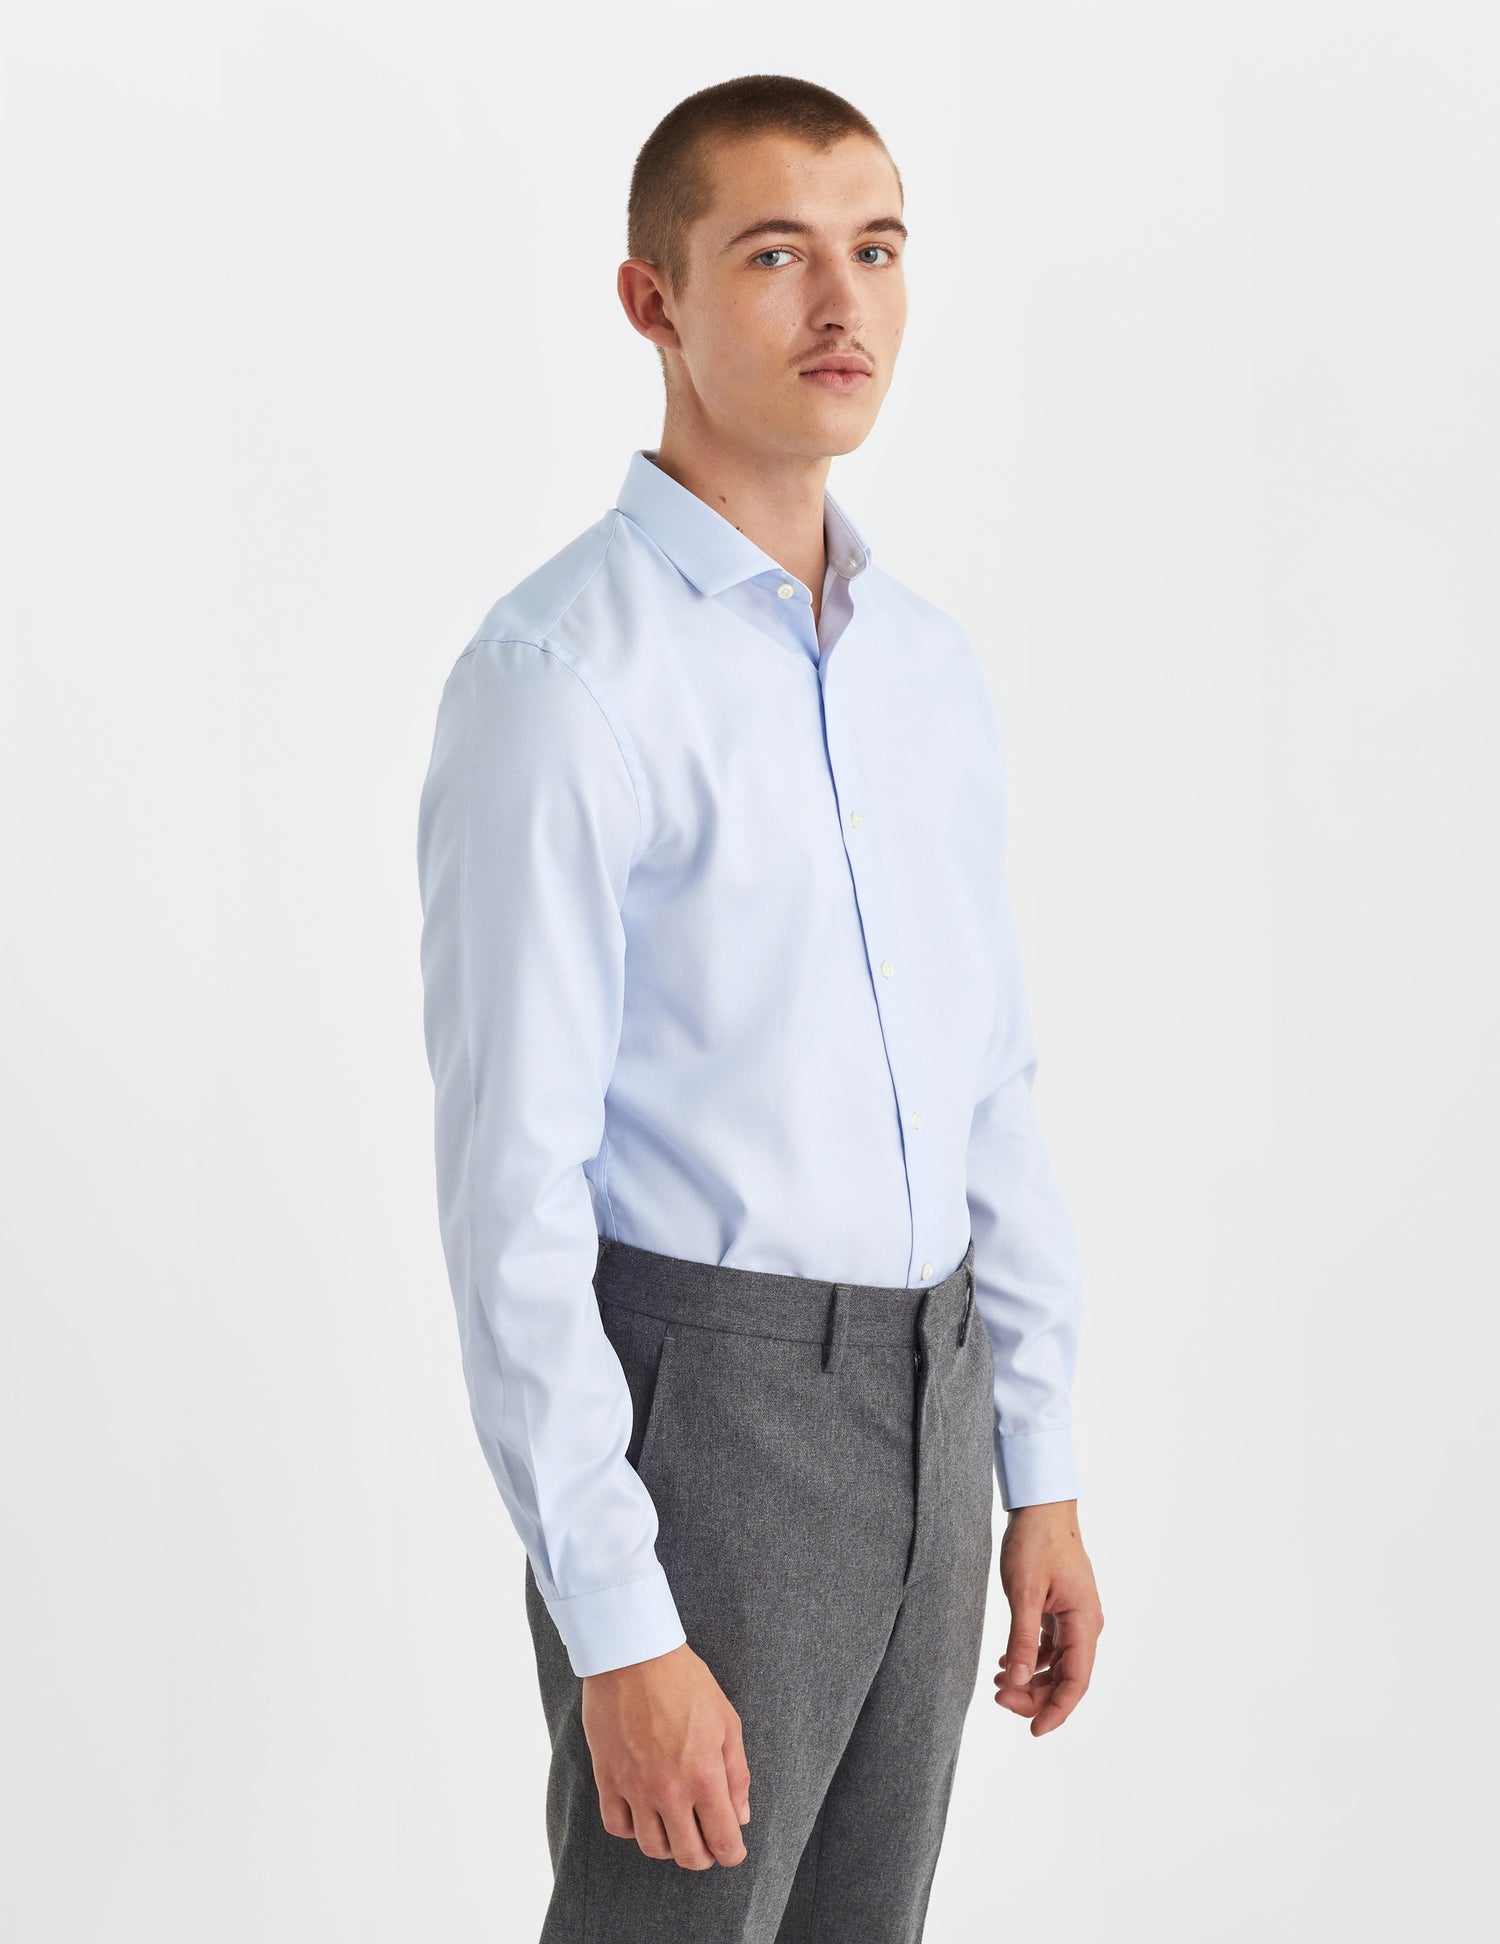 Fitted blue shirt - Shaped - Thin Collar#3